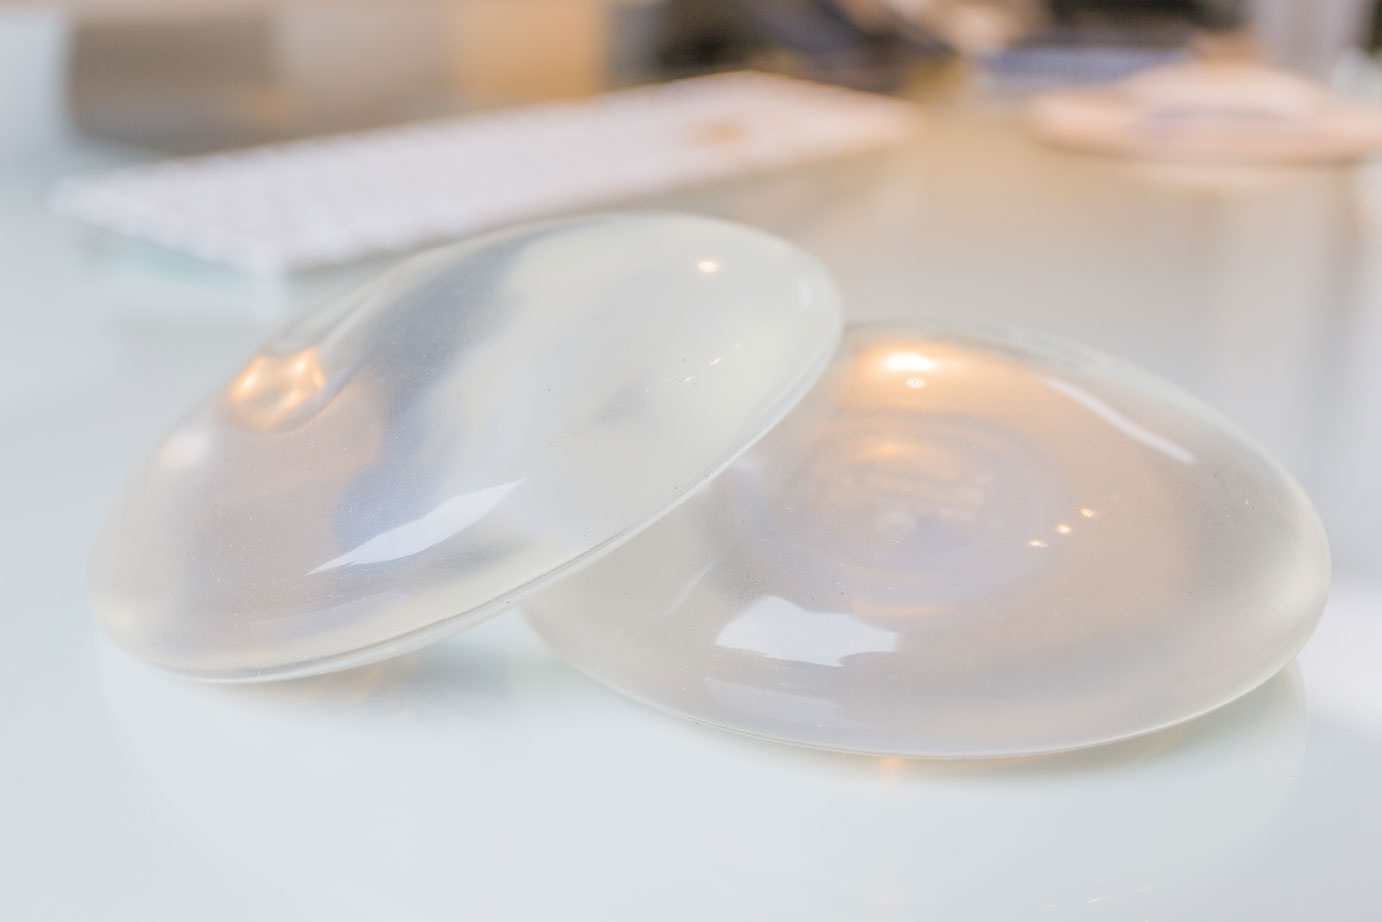 Breast Implants by Allergan Recalled for Link to Cancer